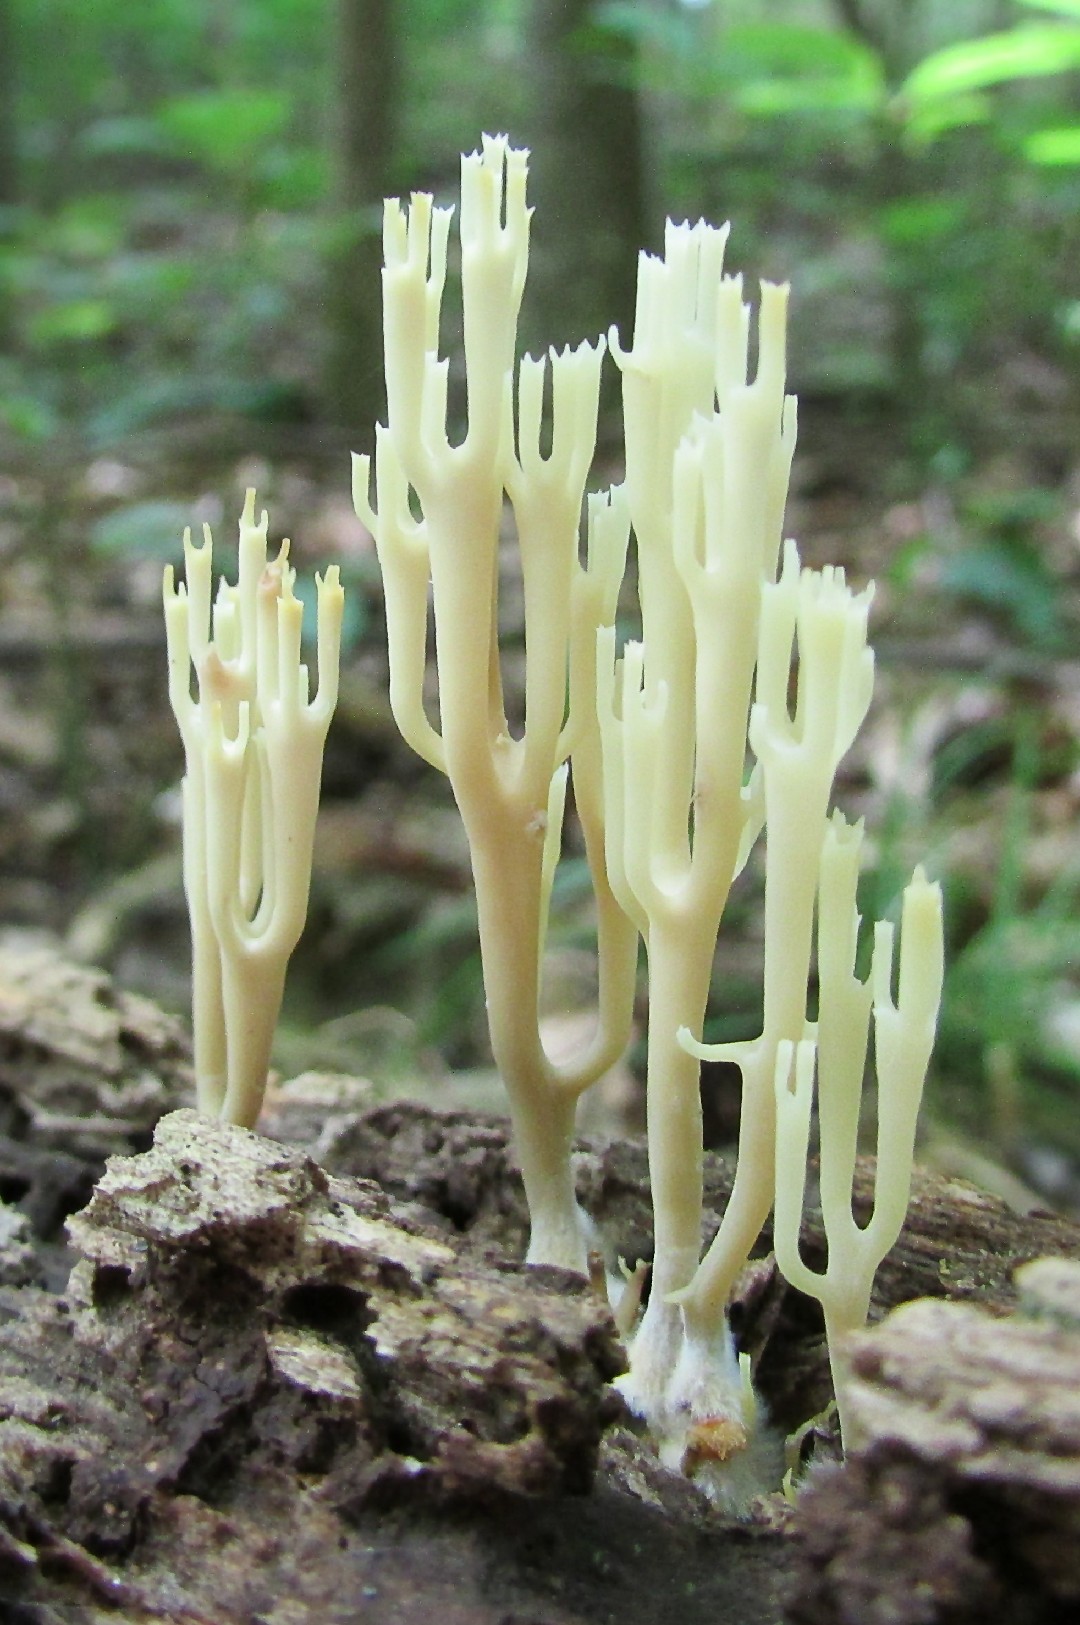 Crown-tipped coral